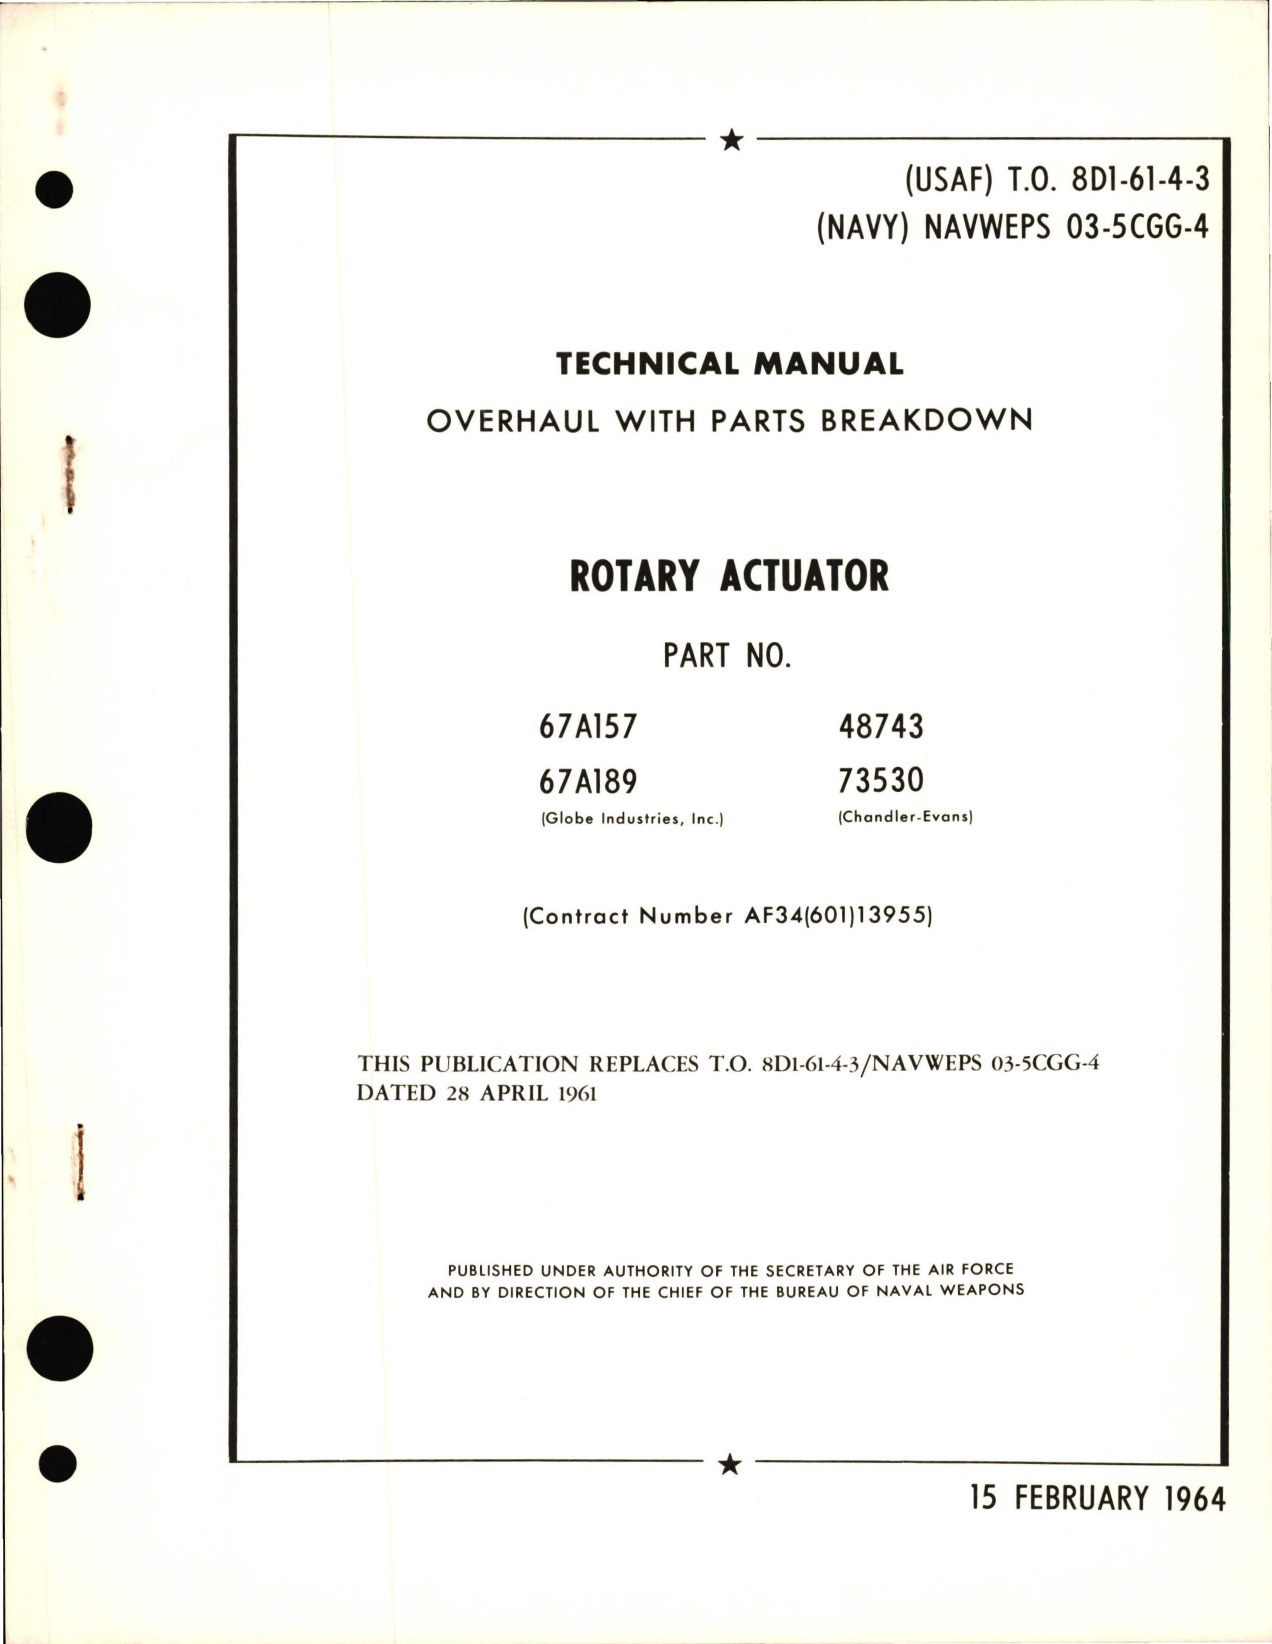 Sample page 1 from AirCorps Library document: Overhaul with Parts Breakdown for Rotary Actuator - Part 67A157, 67A189, 48743 and 73530 